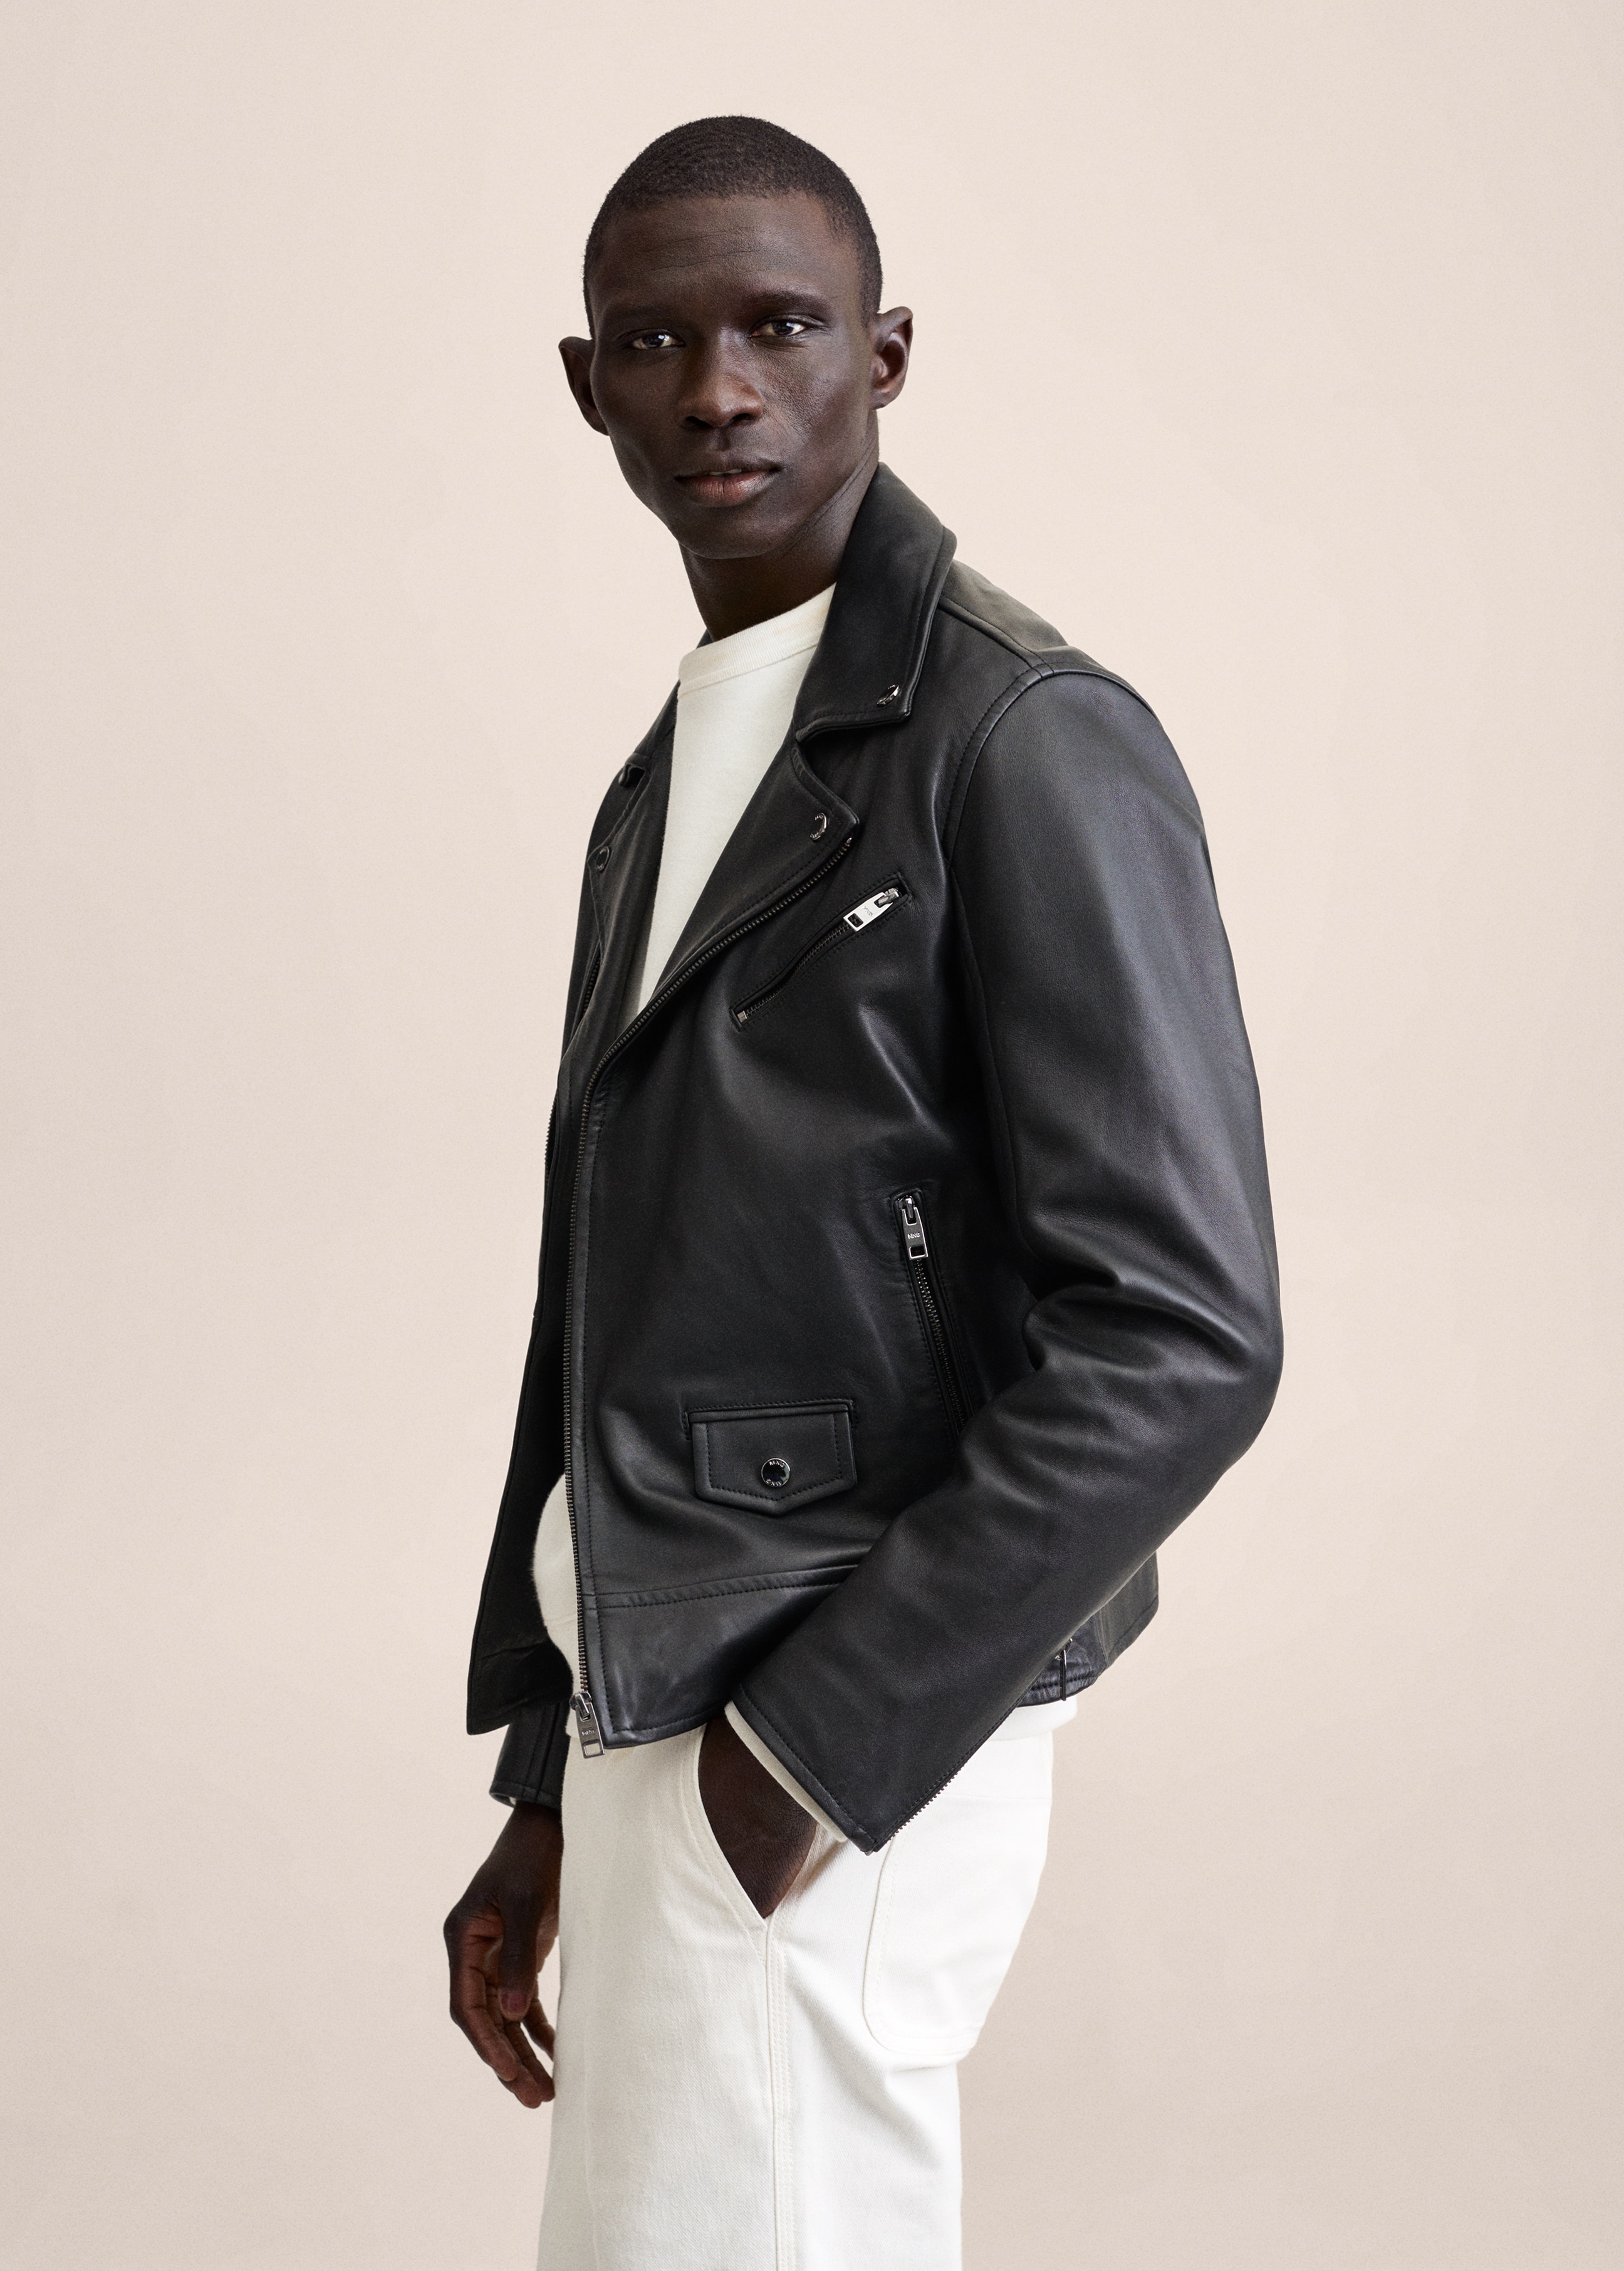 Leather biker jacket - Details of the article 2